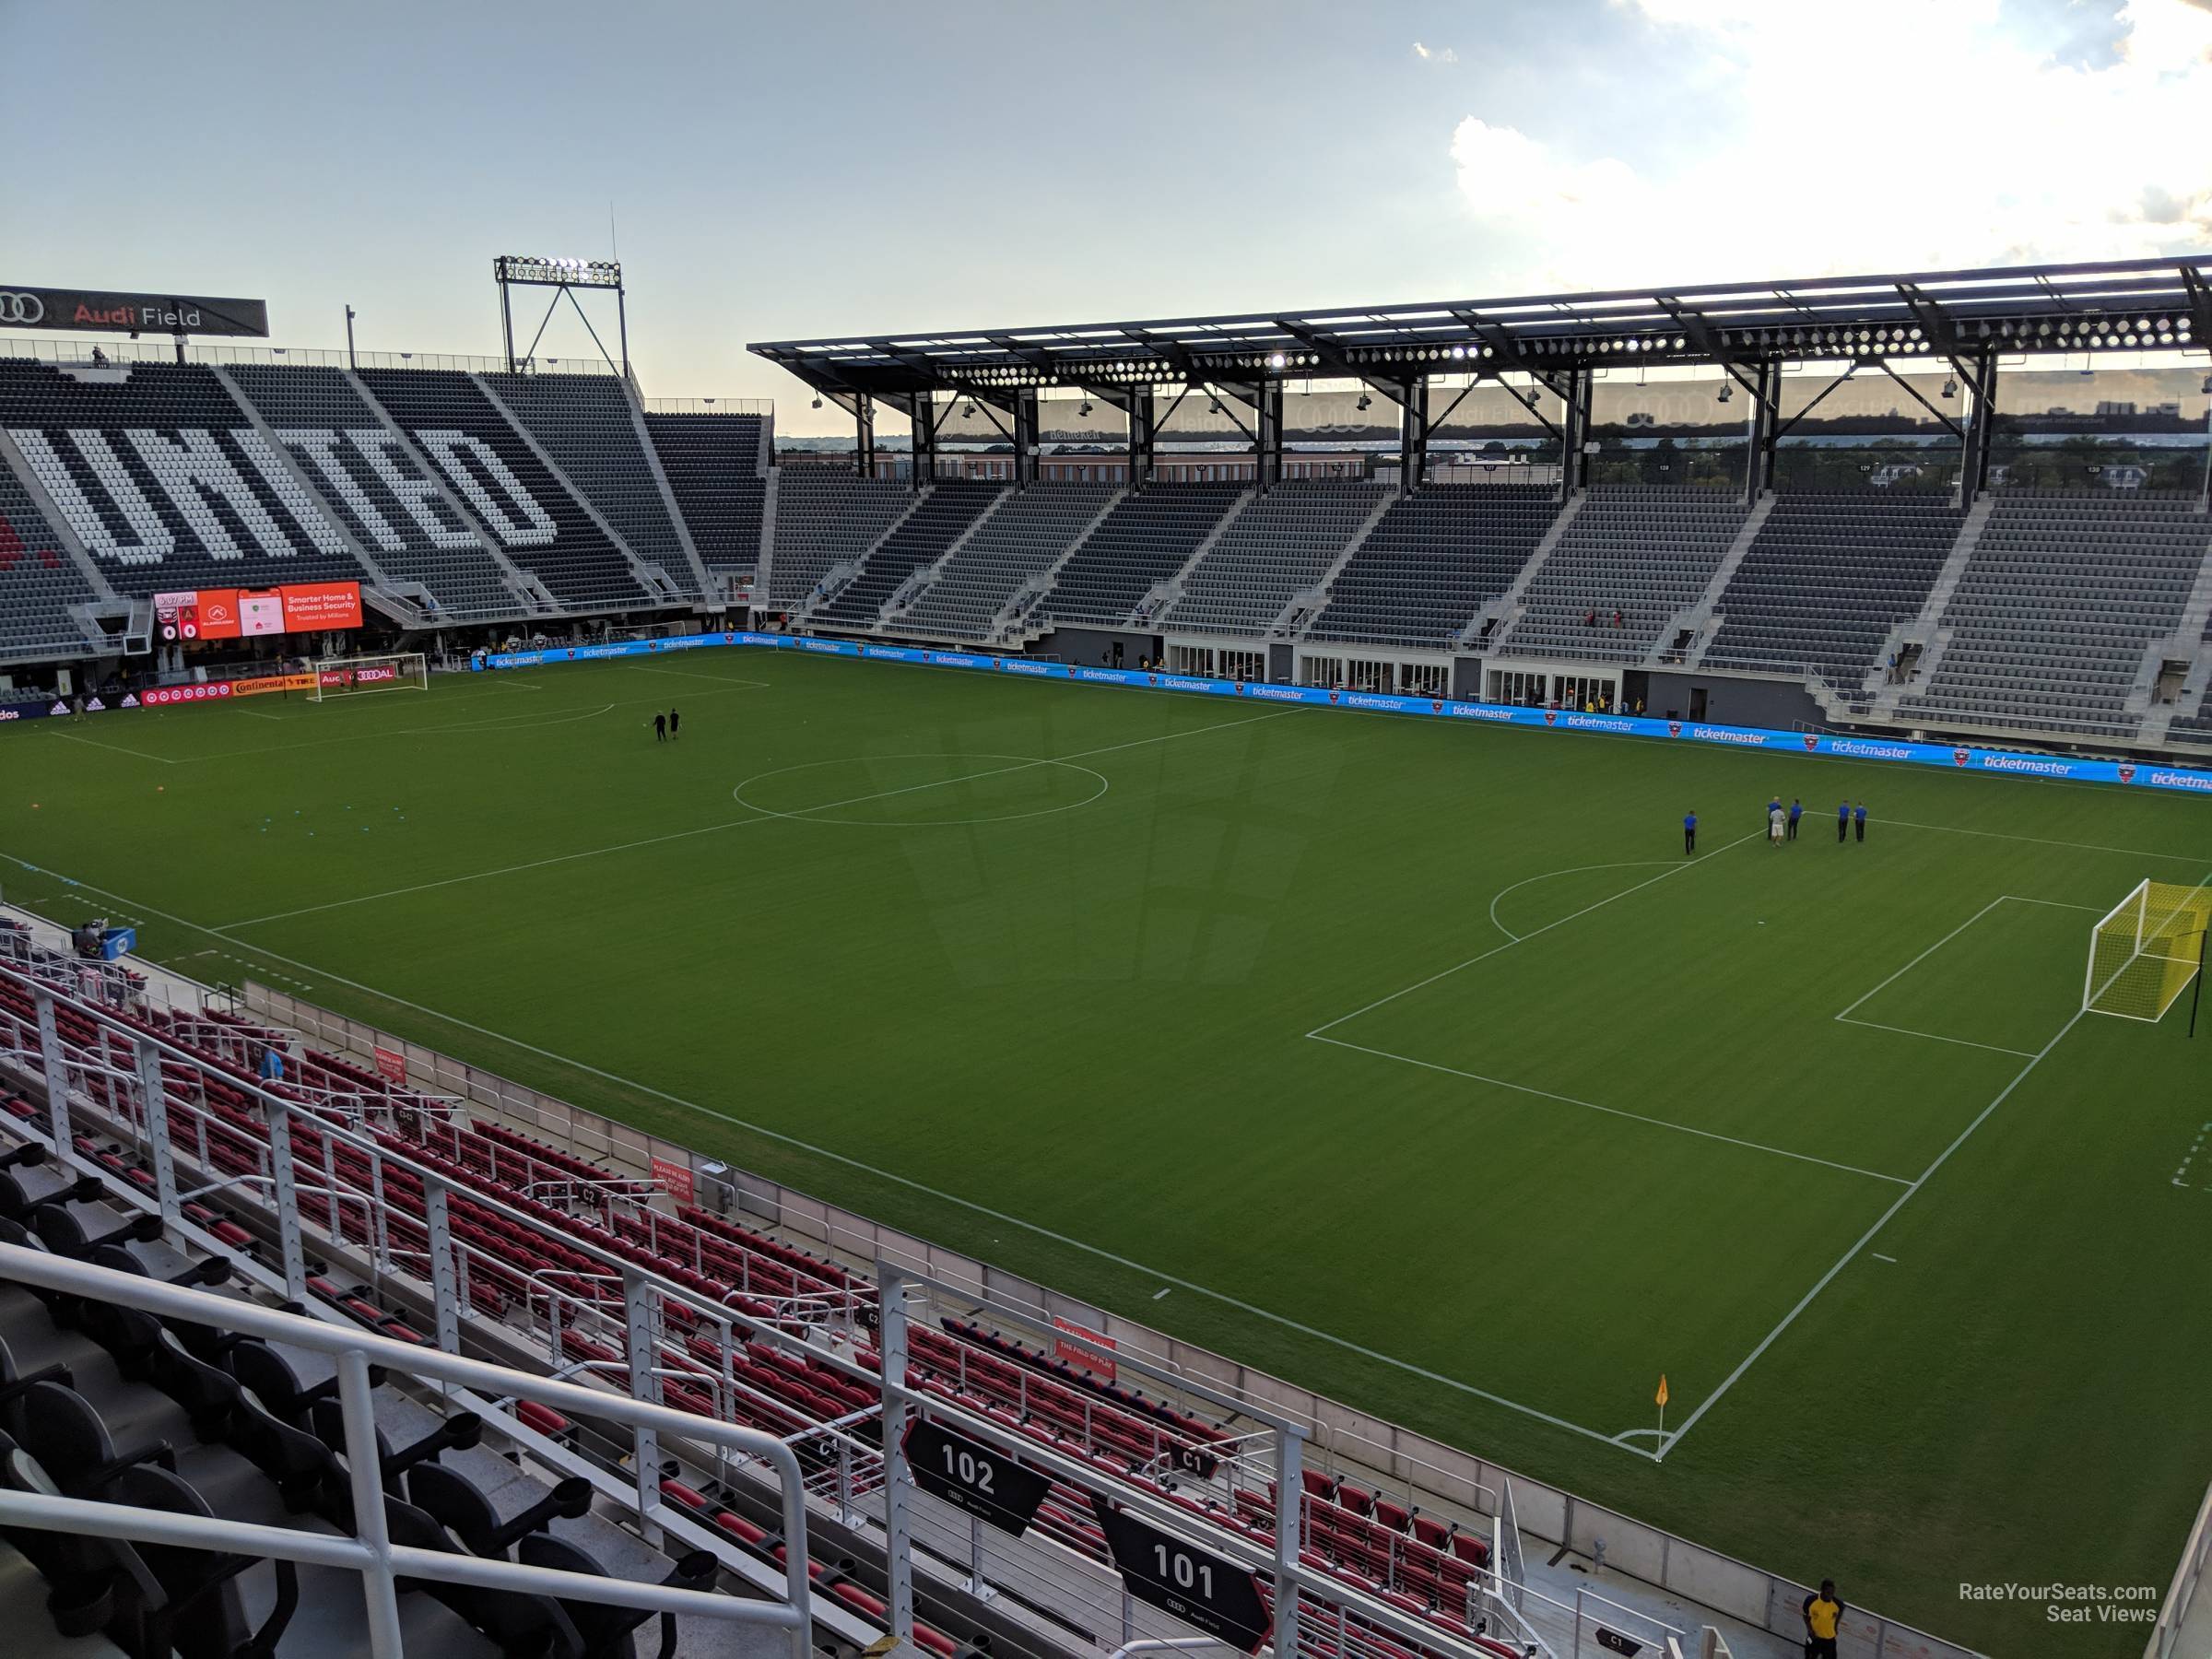 section 101, row 4 seat view  - audi field